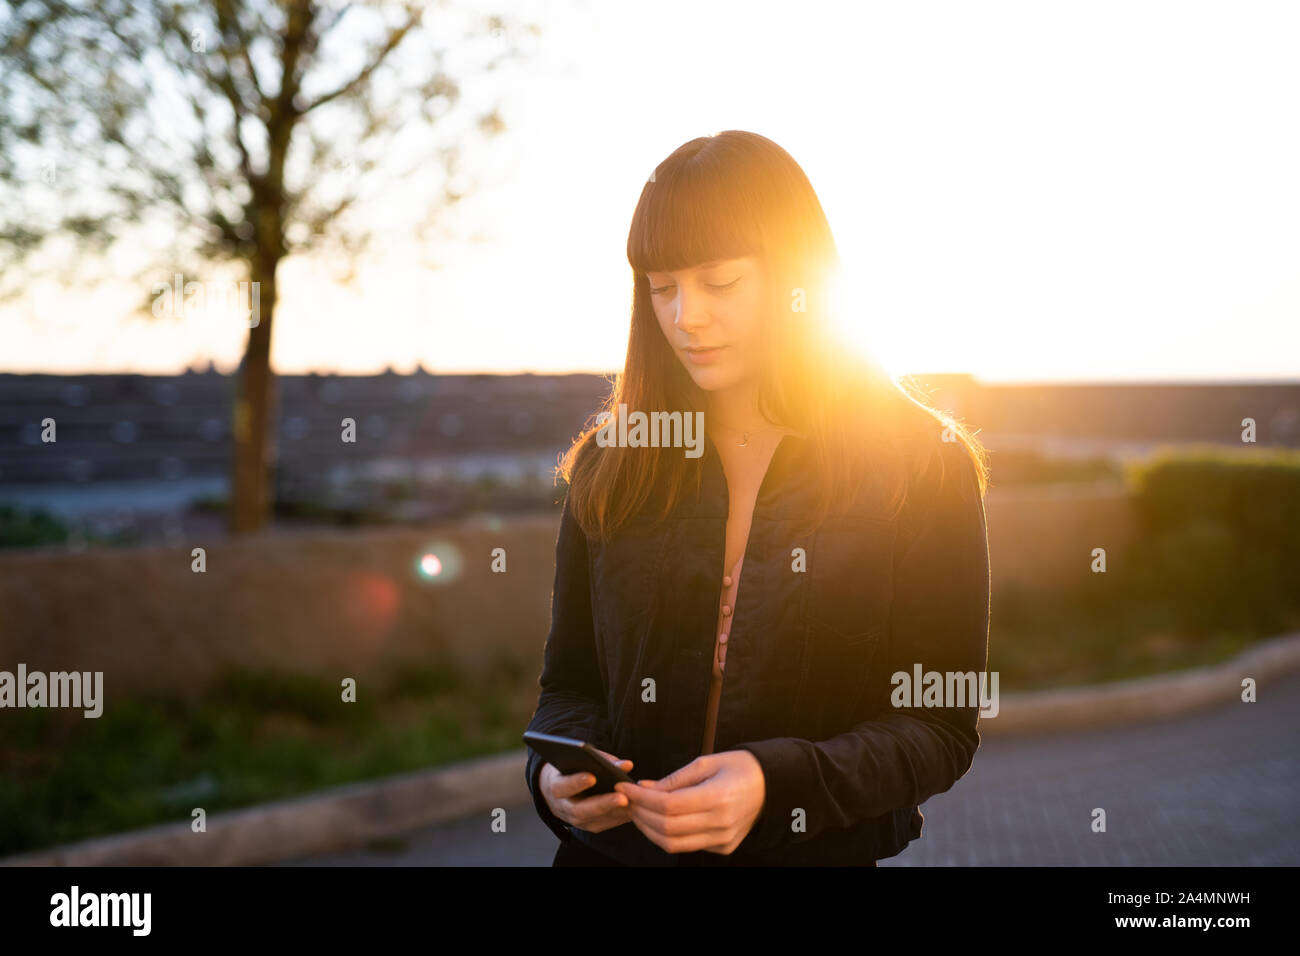 Woman looking at cell phone Stock Photo